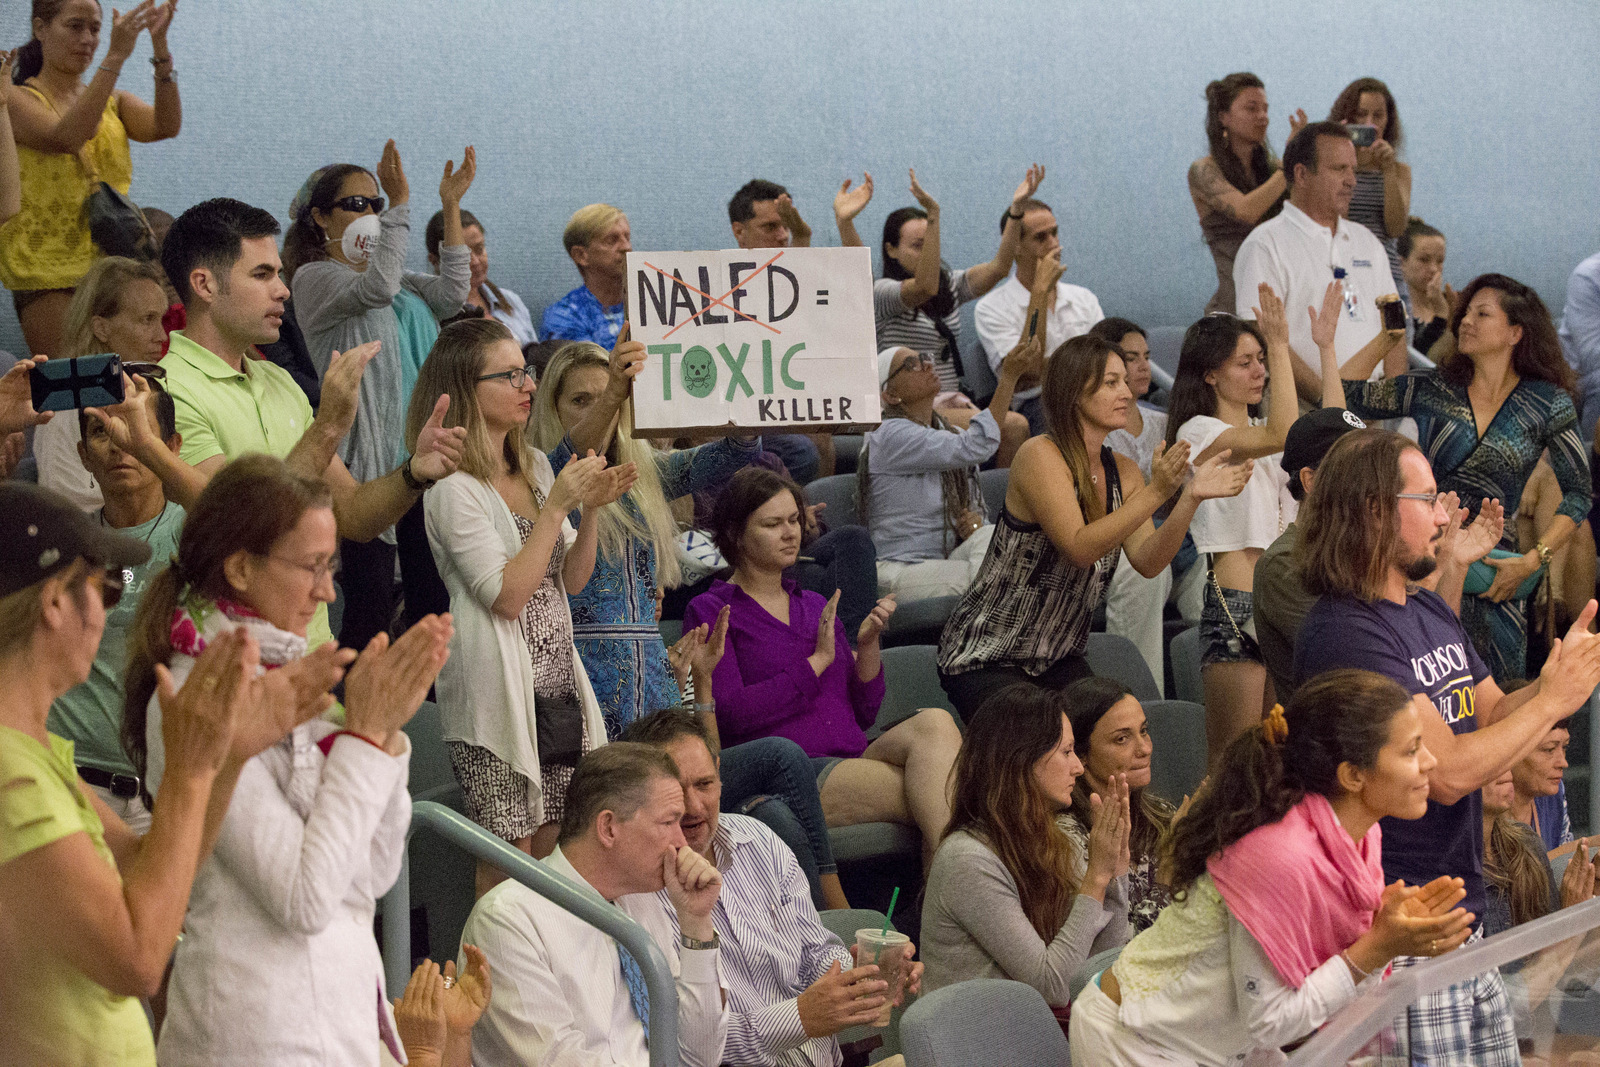 Demonstrators cheer at a city commission meeting in Miami Beach, Fla. Opponents want to stop the aerial spraying of the insecticide naled, used to combat the Aedes aegypti mosquito, Sept. 14, 2016. (AP Photo/Wilfredo Lee)